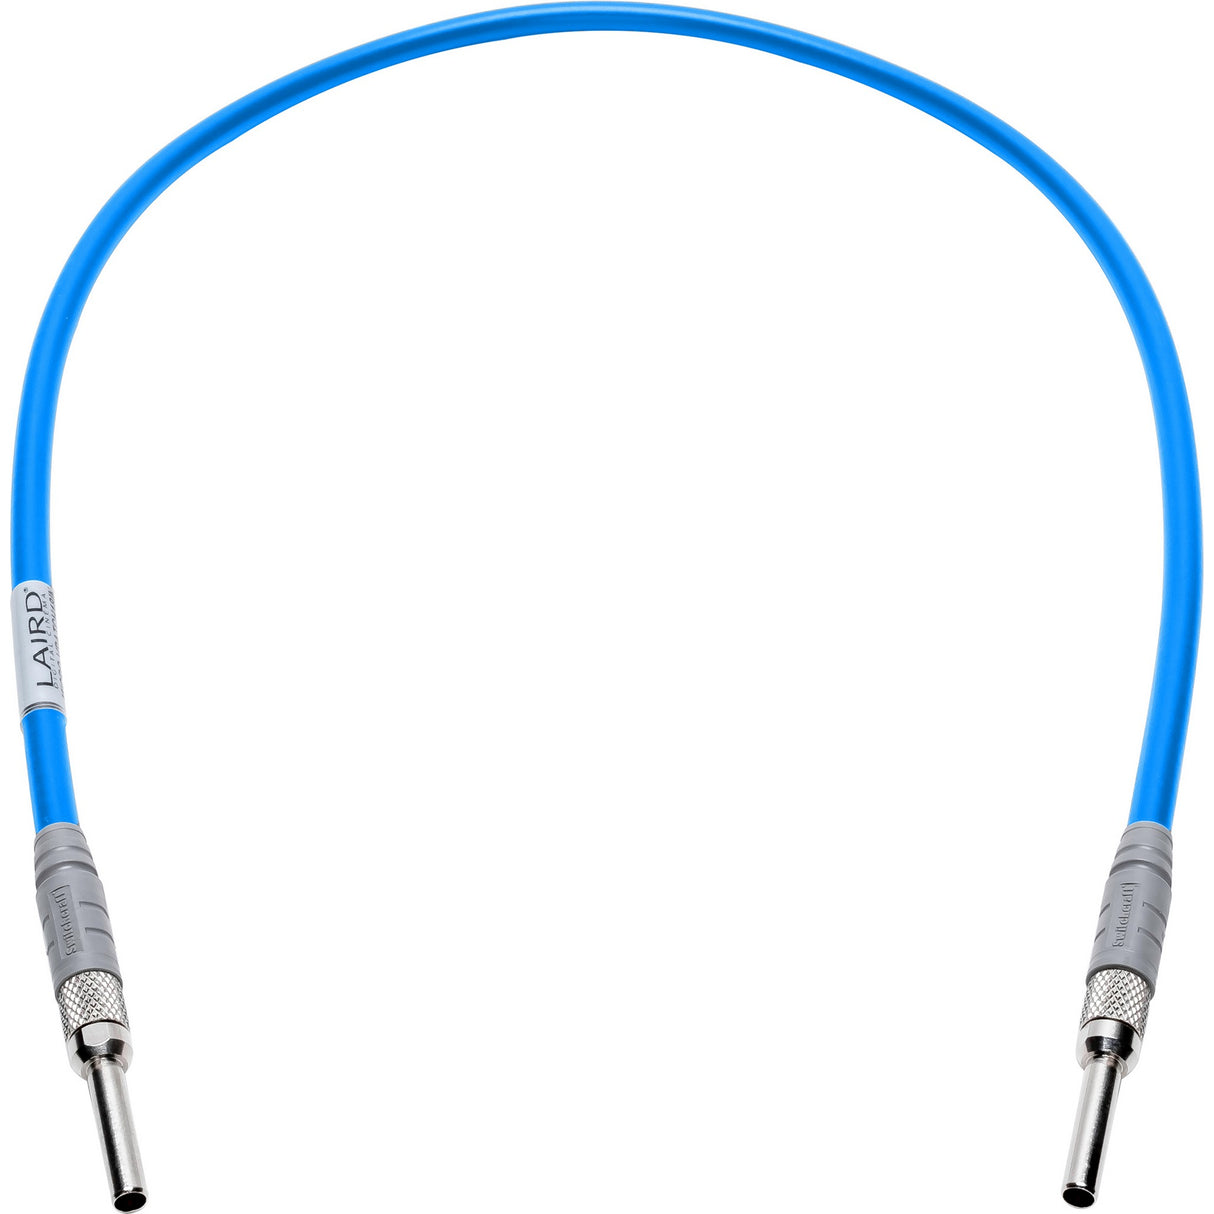 Laird MICRO-VPATCH-003BE 12G-SDI Micro Video Patch Cable, Light Blue, 3-Feet